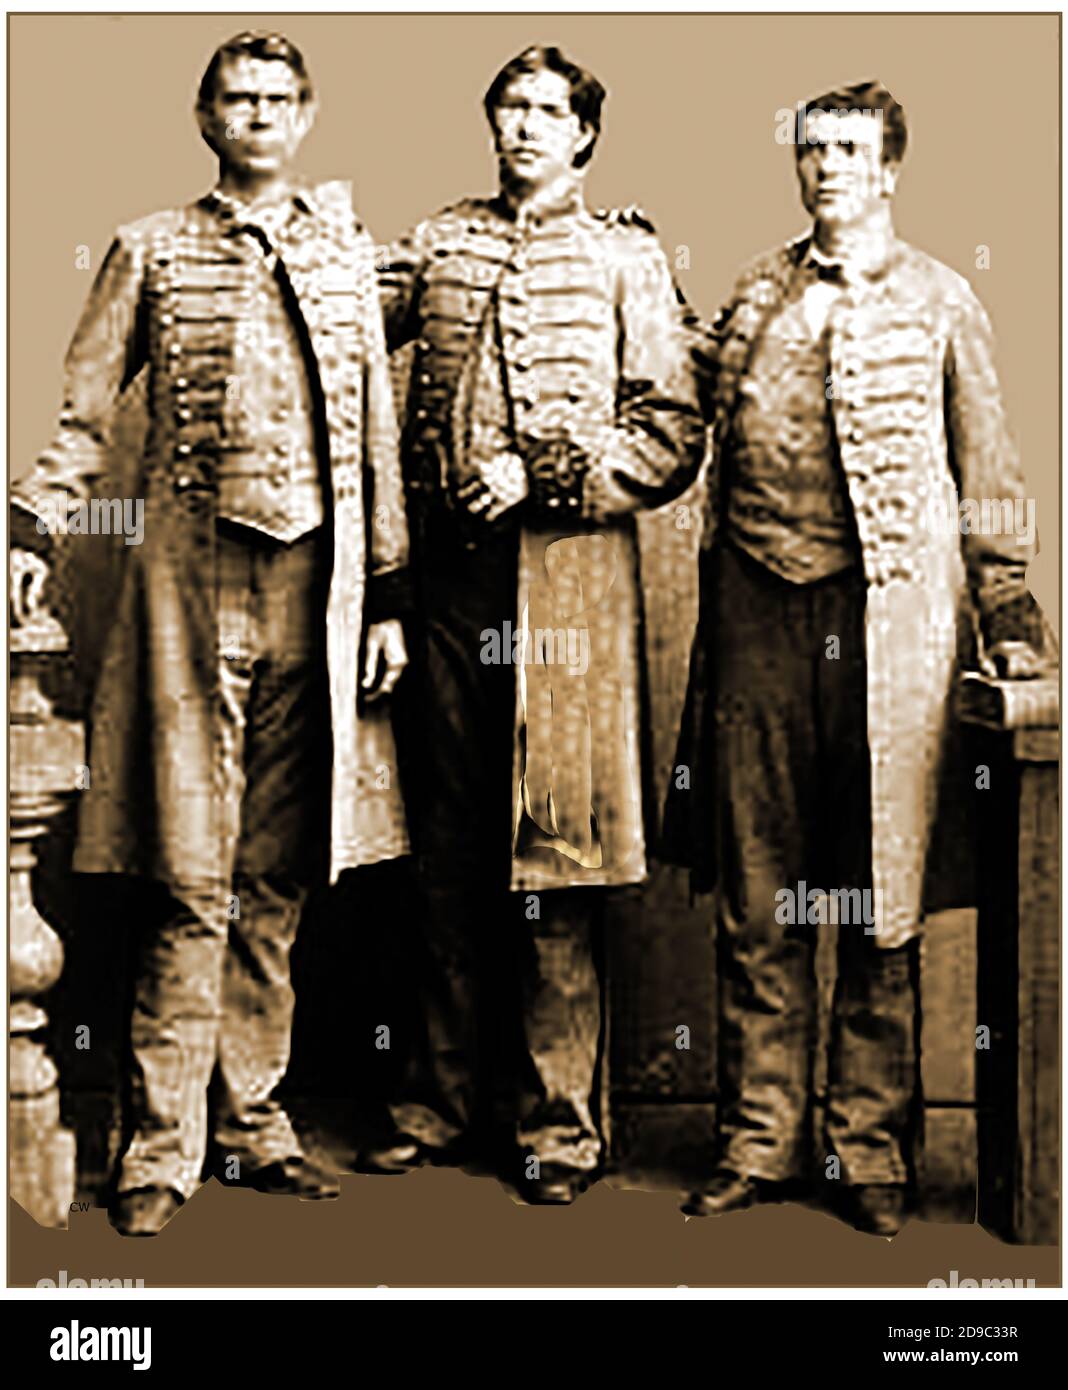 The three American 'Giant Brothers'. This old photograph gives no details but they are believed to have been the 3 of  4 travelling Shields Brothers,  sometimes advertised as the Texas Giants. They were actually part of a larger family of exceptionallyn tall brothers, four of which toured with freak shows and with Barnum & Bailey's Circus, though alternating brothers and even other tall men were sometimes part of the line-up.  Various (perhaps exaggerated) claims were given as to their height, but all touring brothers appear to have exceeded seven feet in height. They didn't  have  acromegaly. Stock Photo